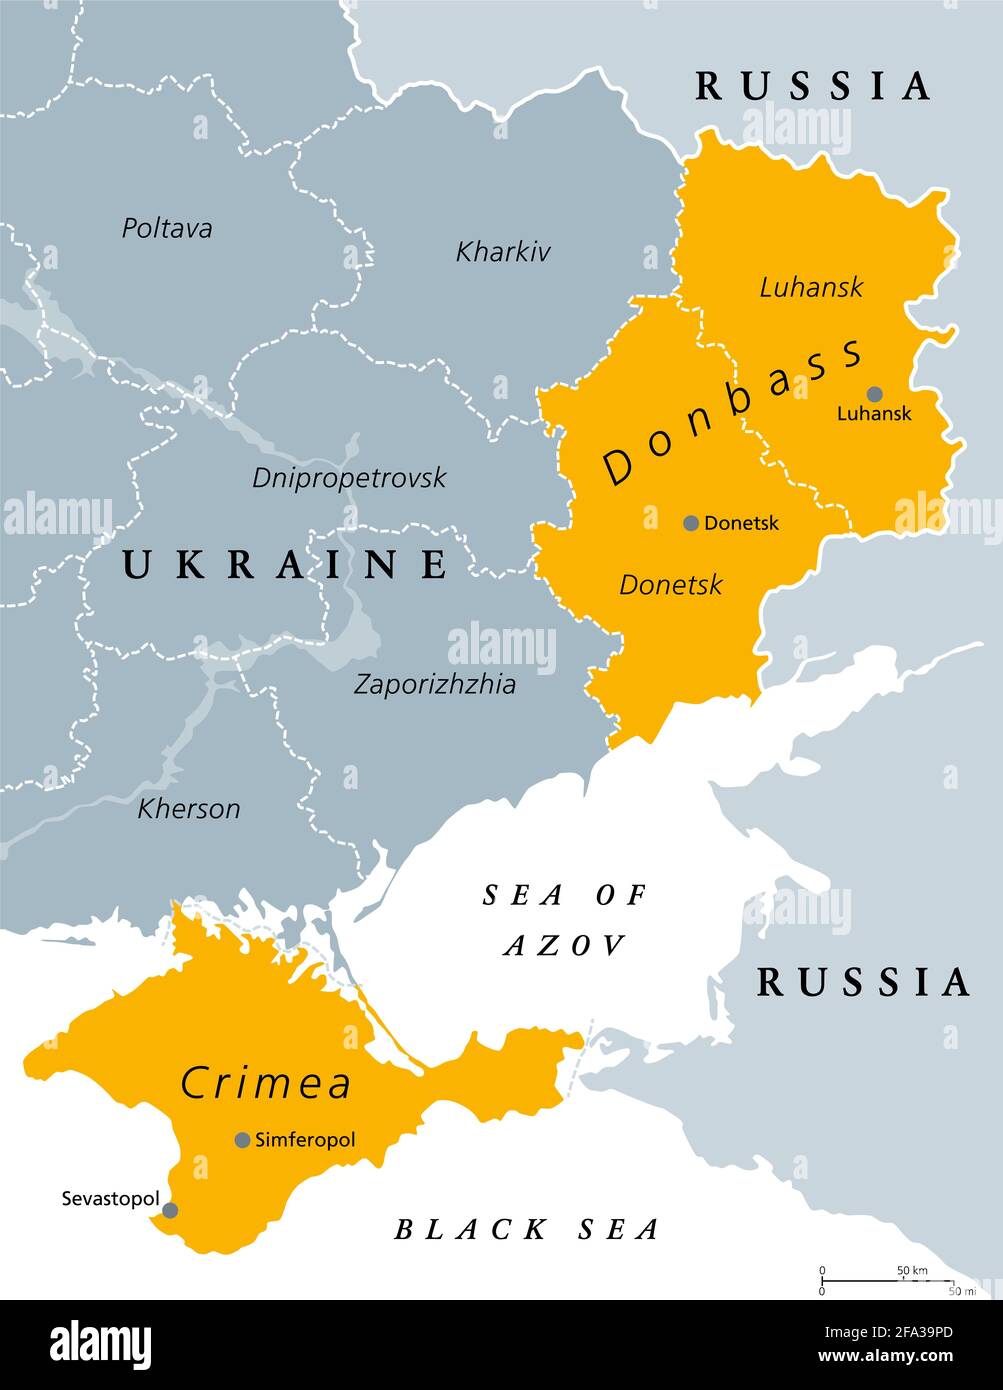 Donbass and Crimea, political map. Crimea peninsula on the coast of Black Sea, and Donbass region, formed by Donetsk and Luhansk region. Disputed area Stock Photo - Alamy